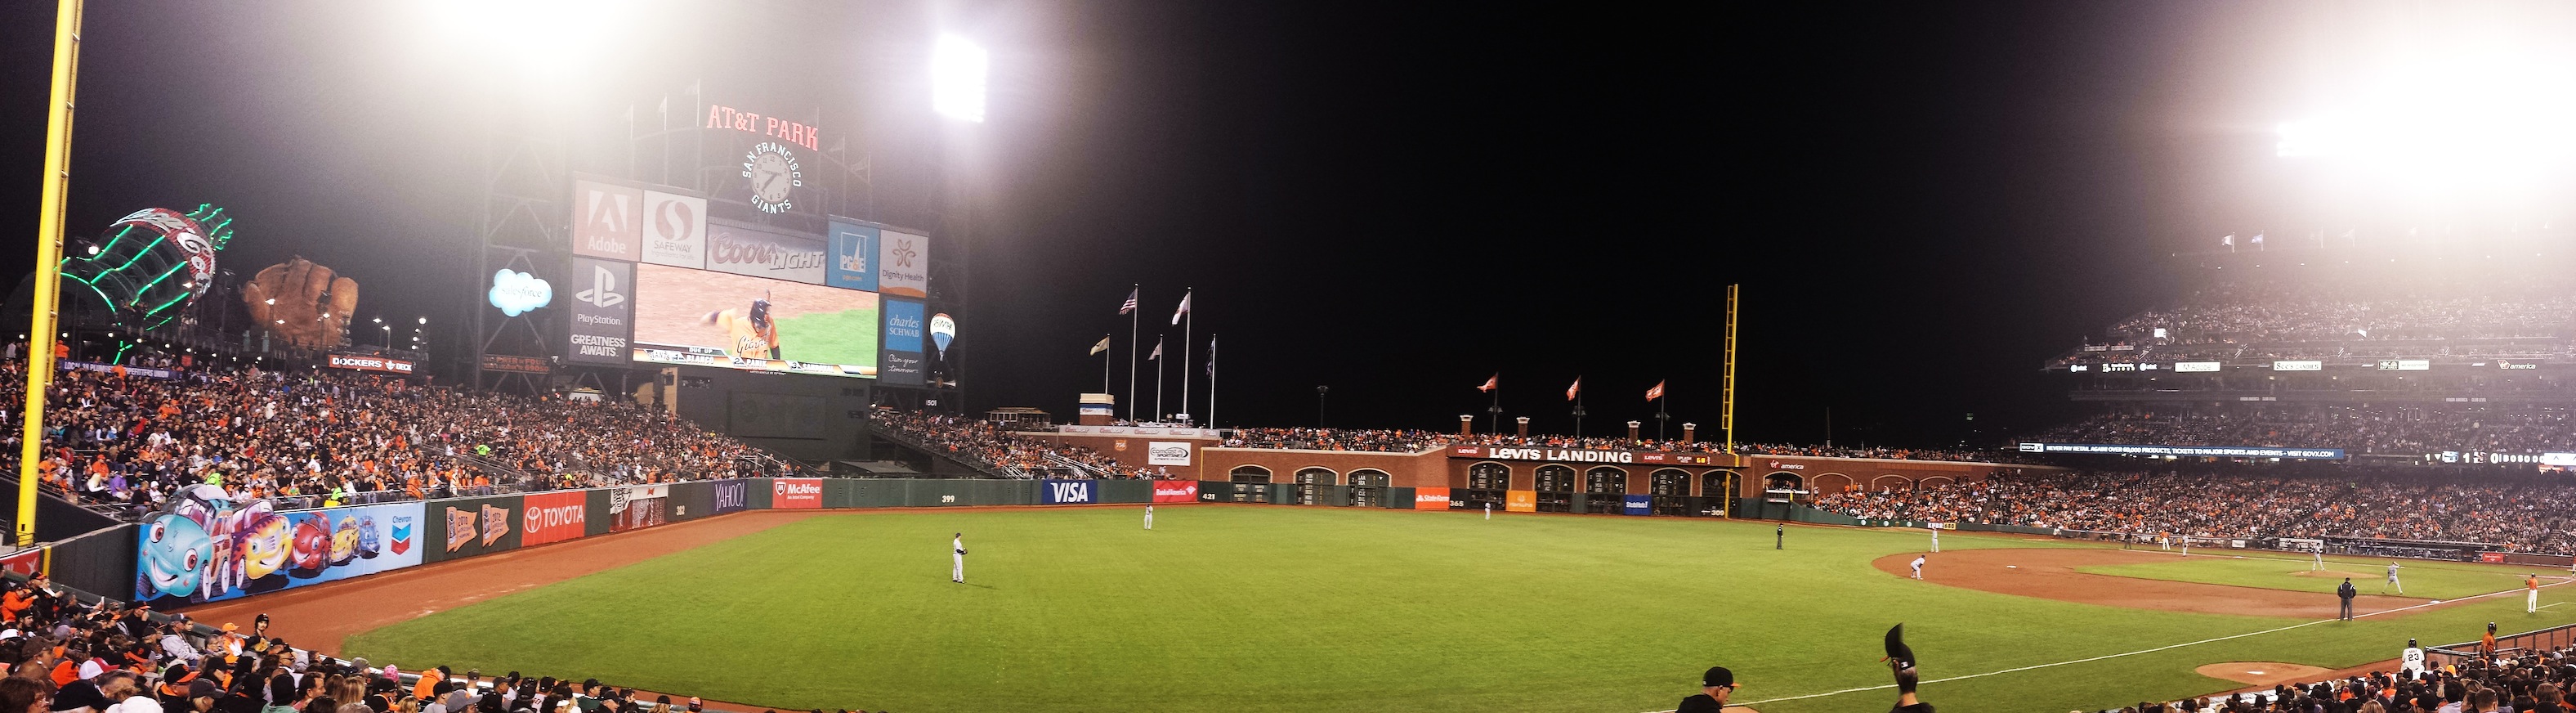 Giants AT&T Park